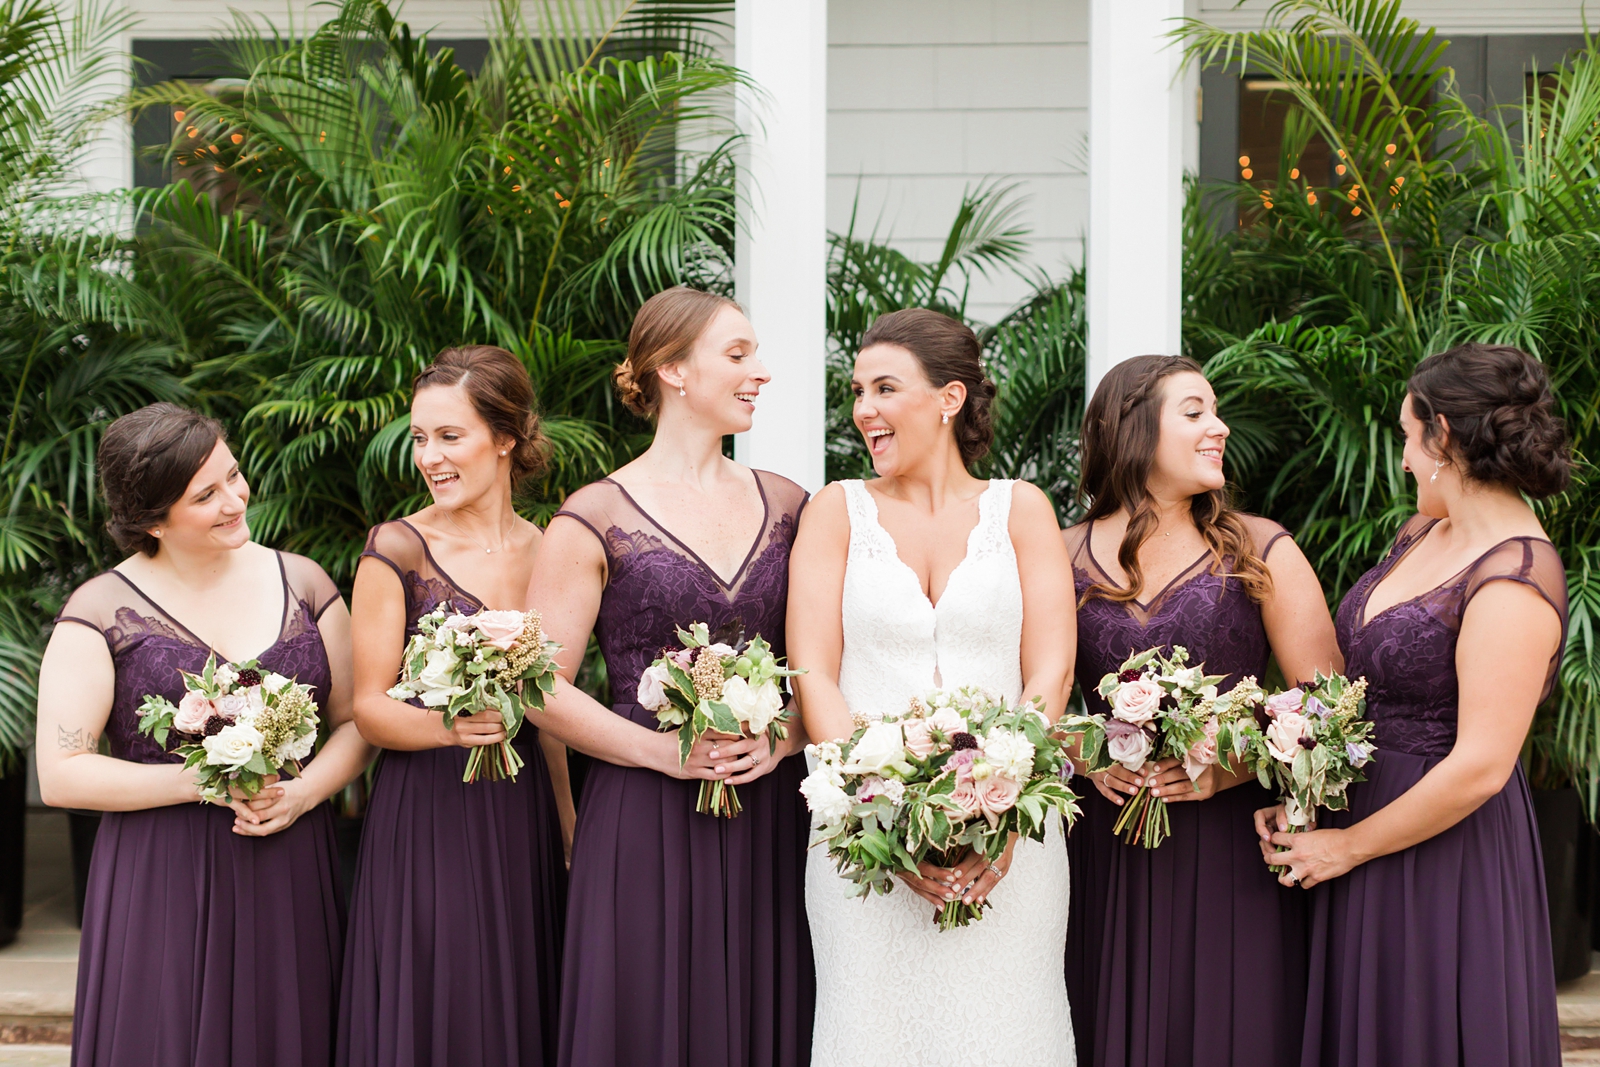 plum colored bridesmaid dresses with lavender and white floral bouquets